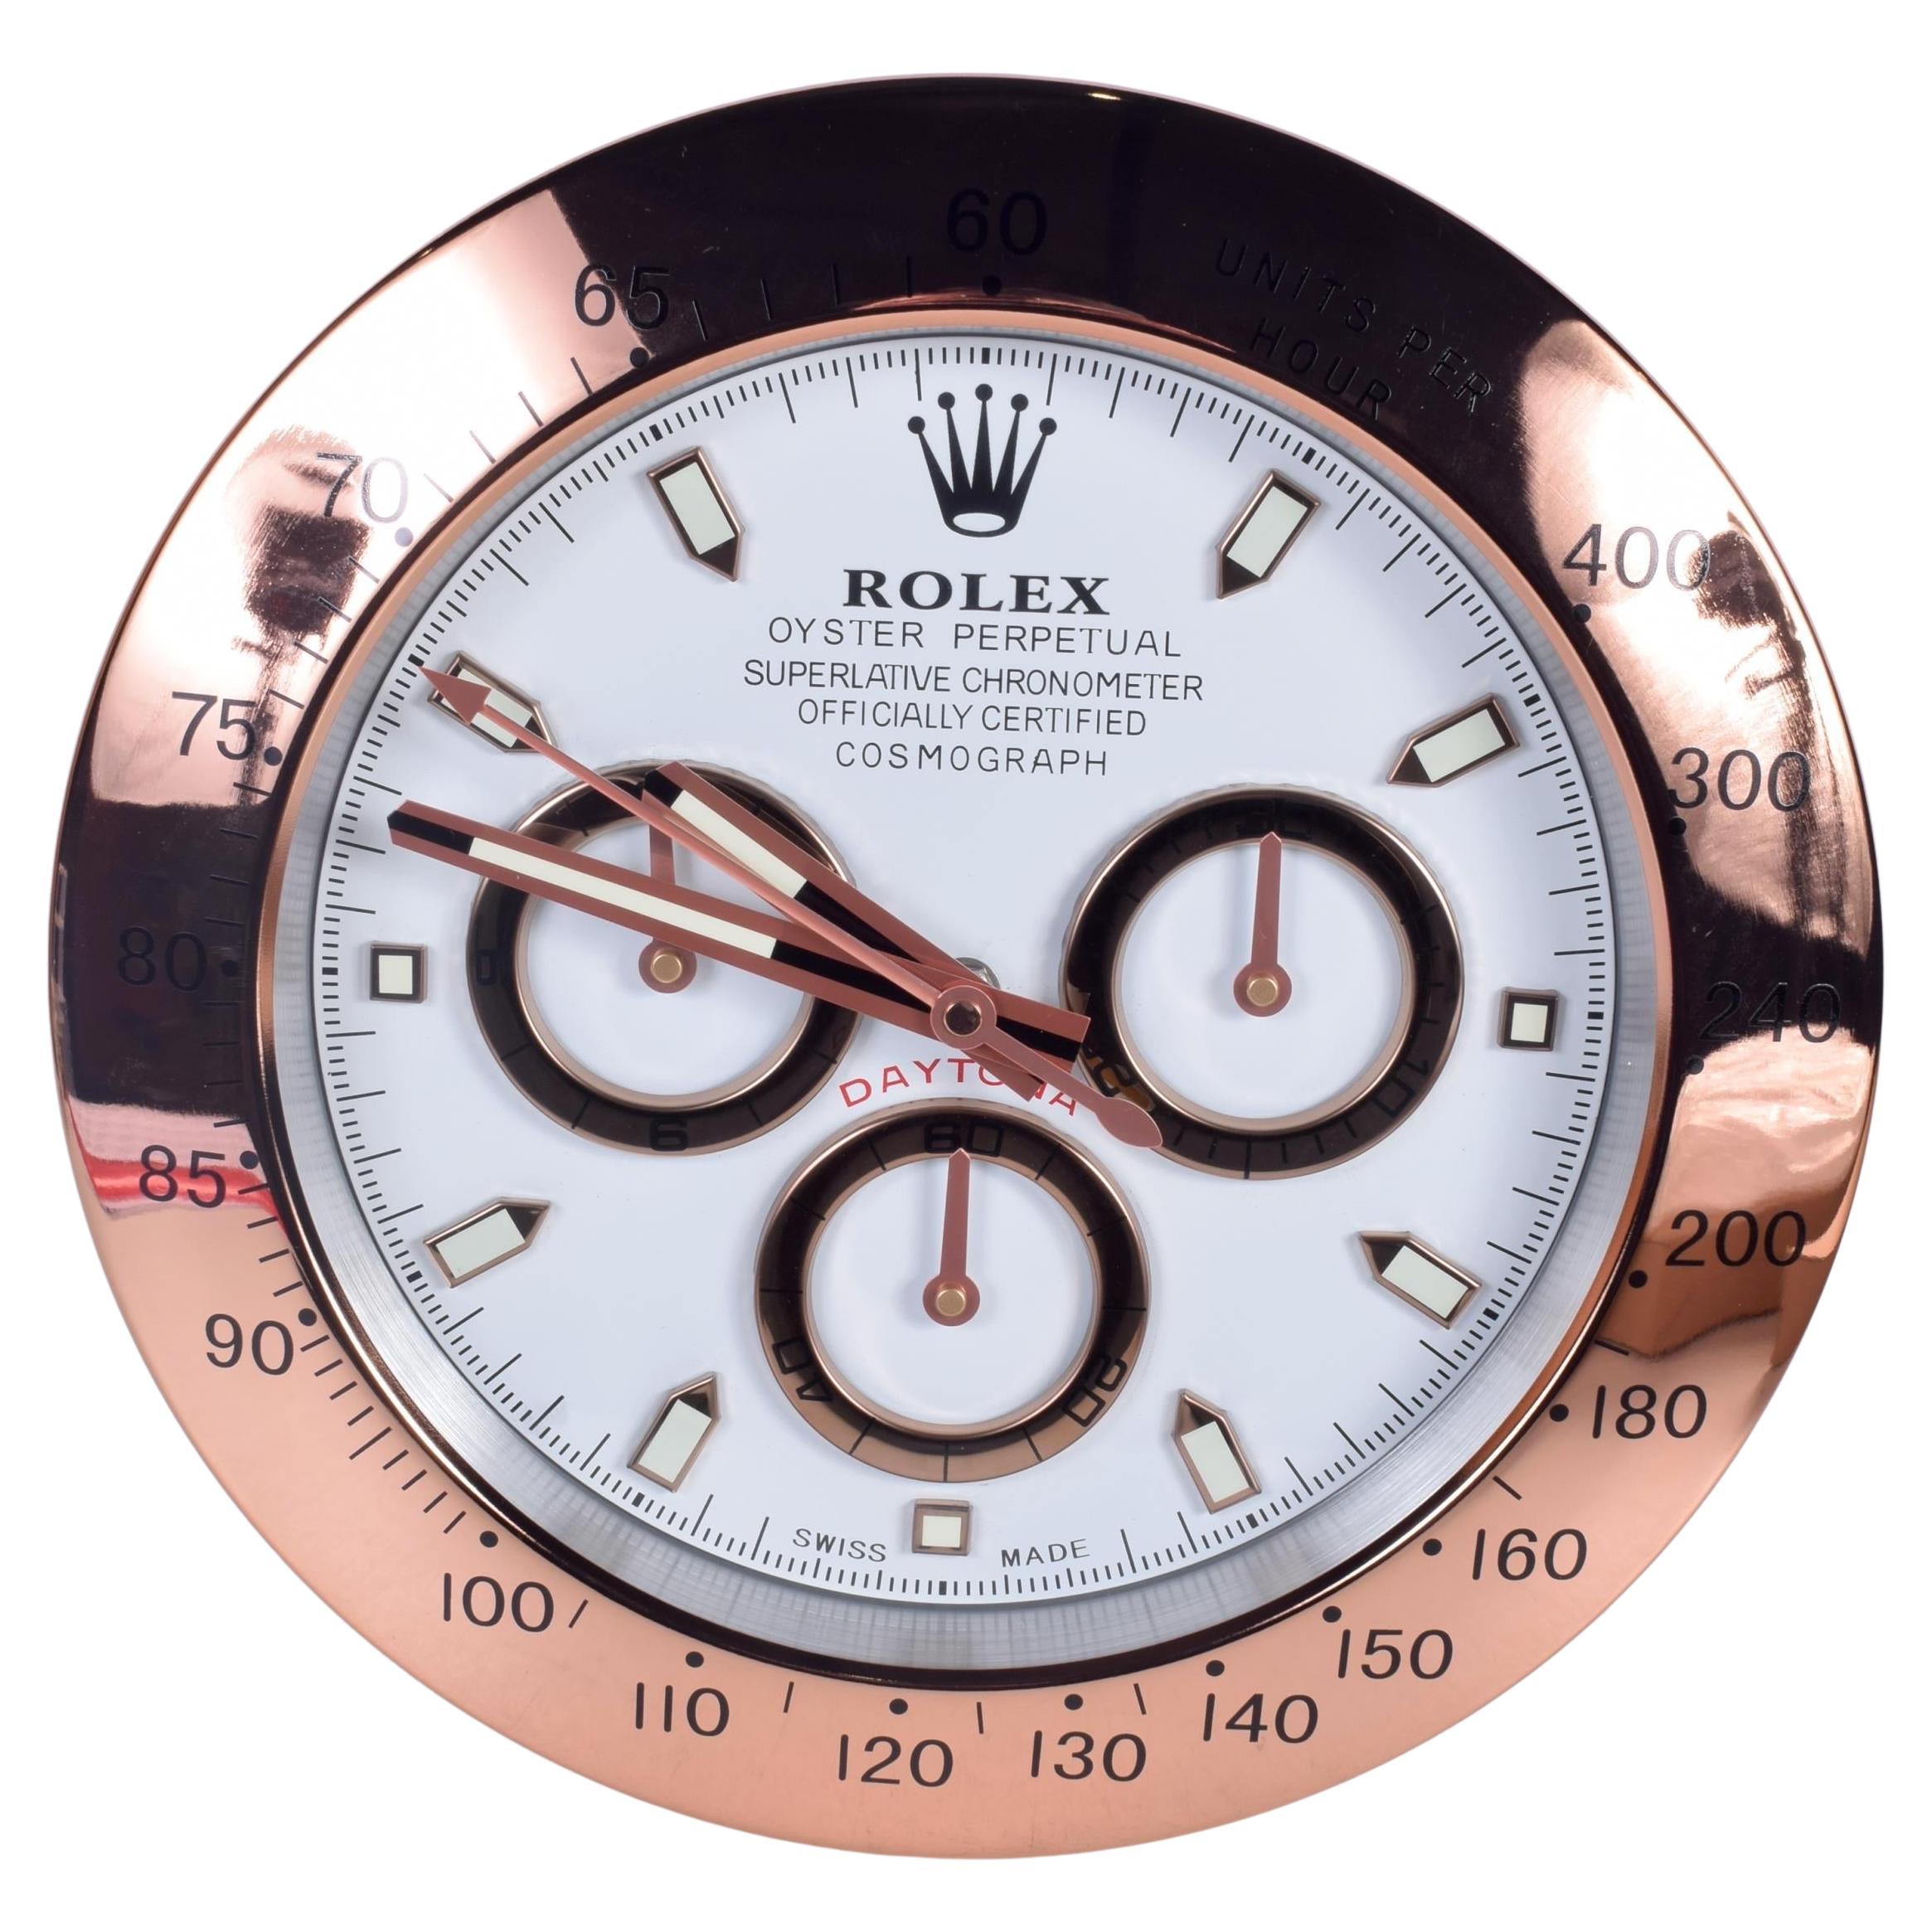 ROLEX Officially Certified Oyster Perpetual Cosmograph Daytona Wall Clock 